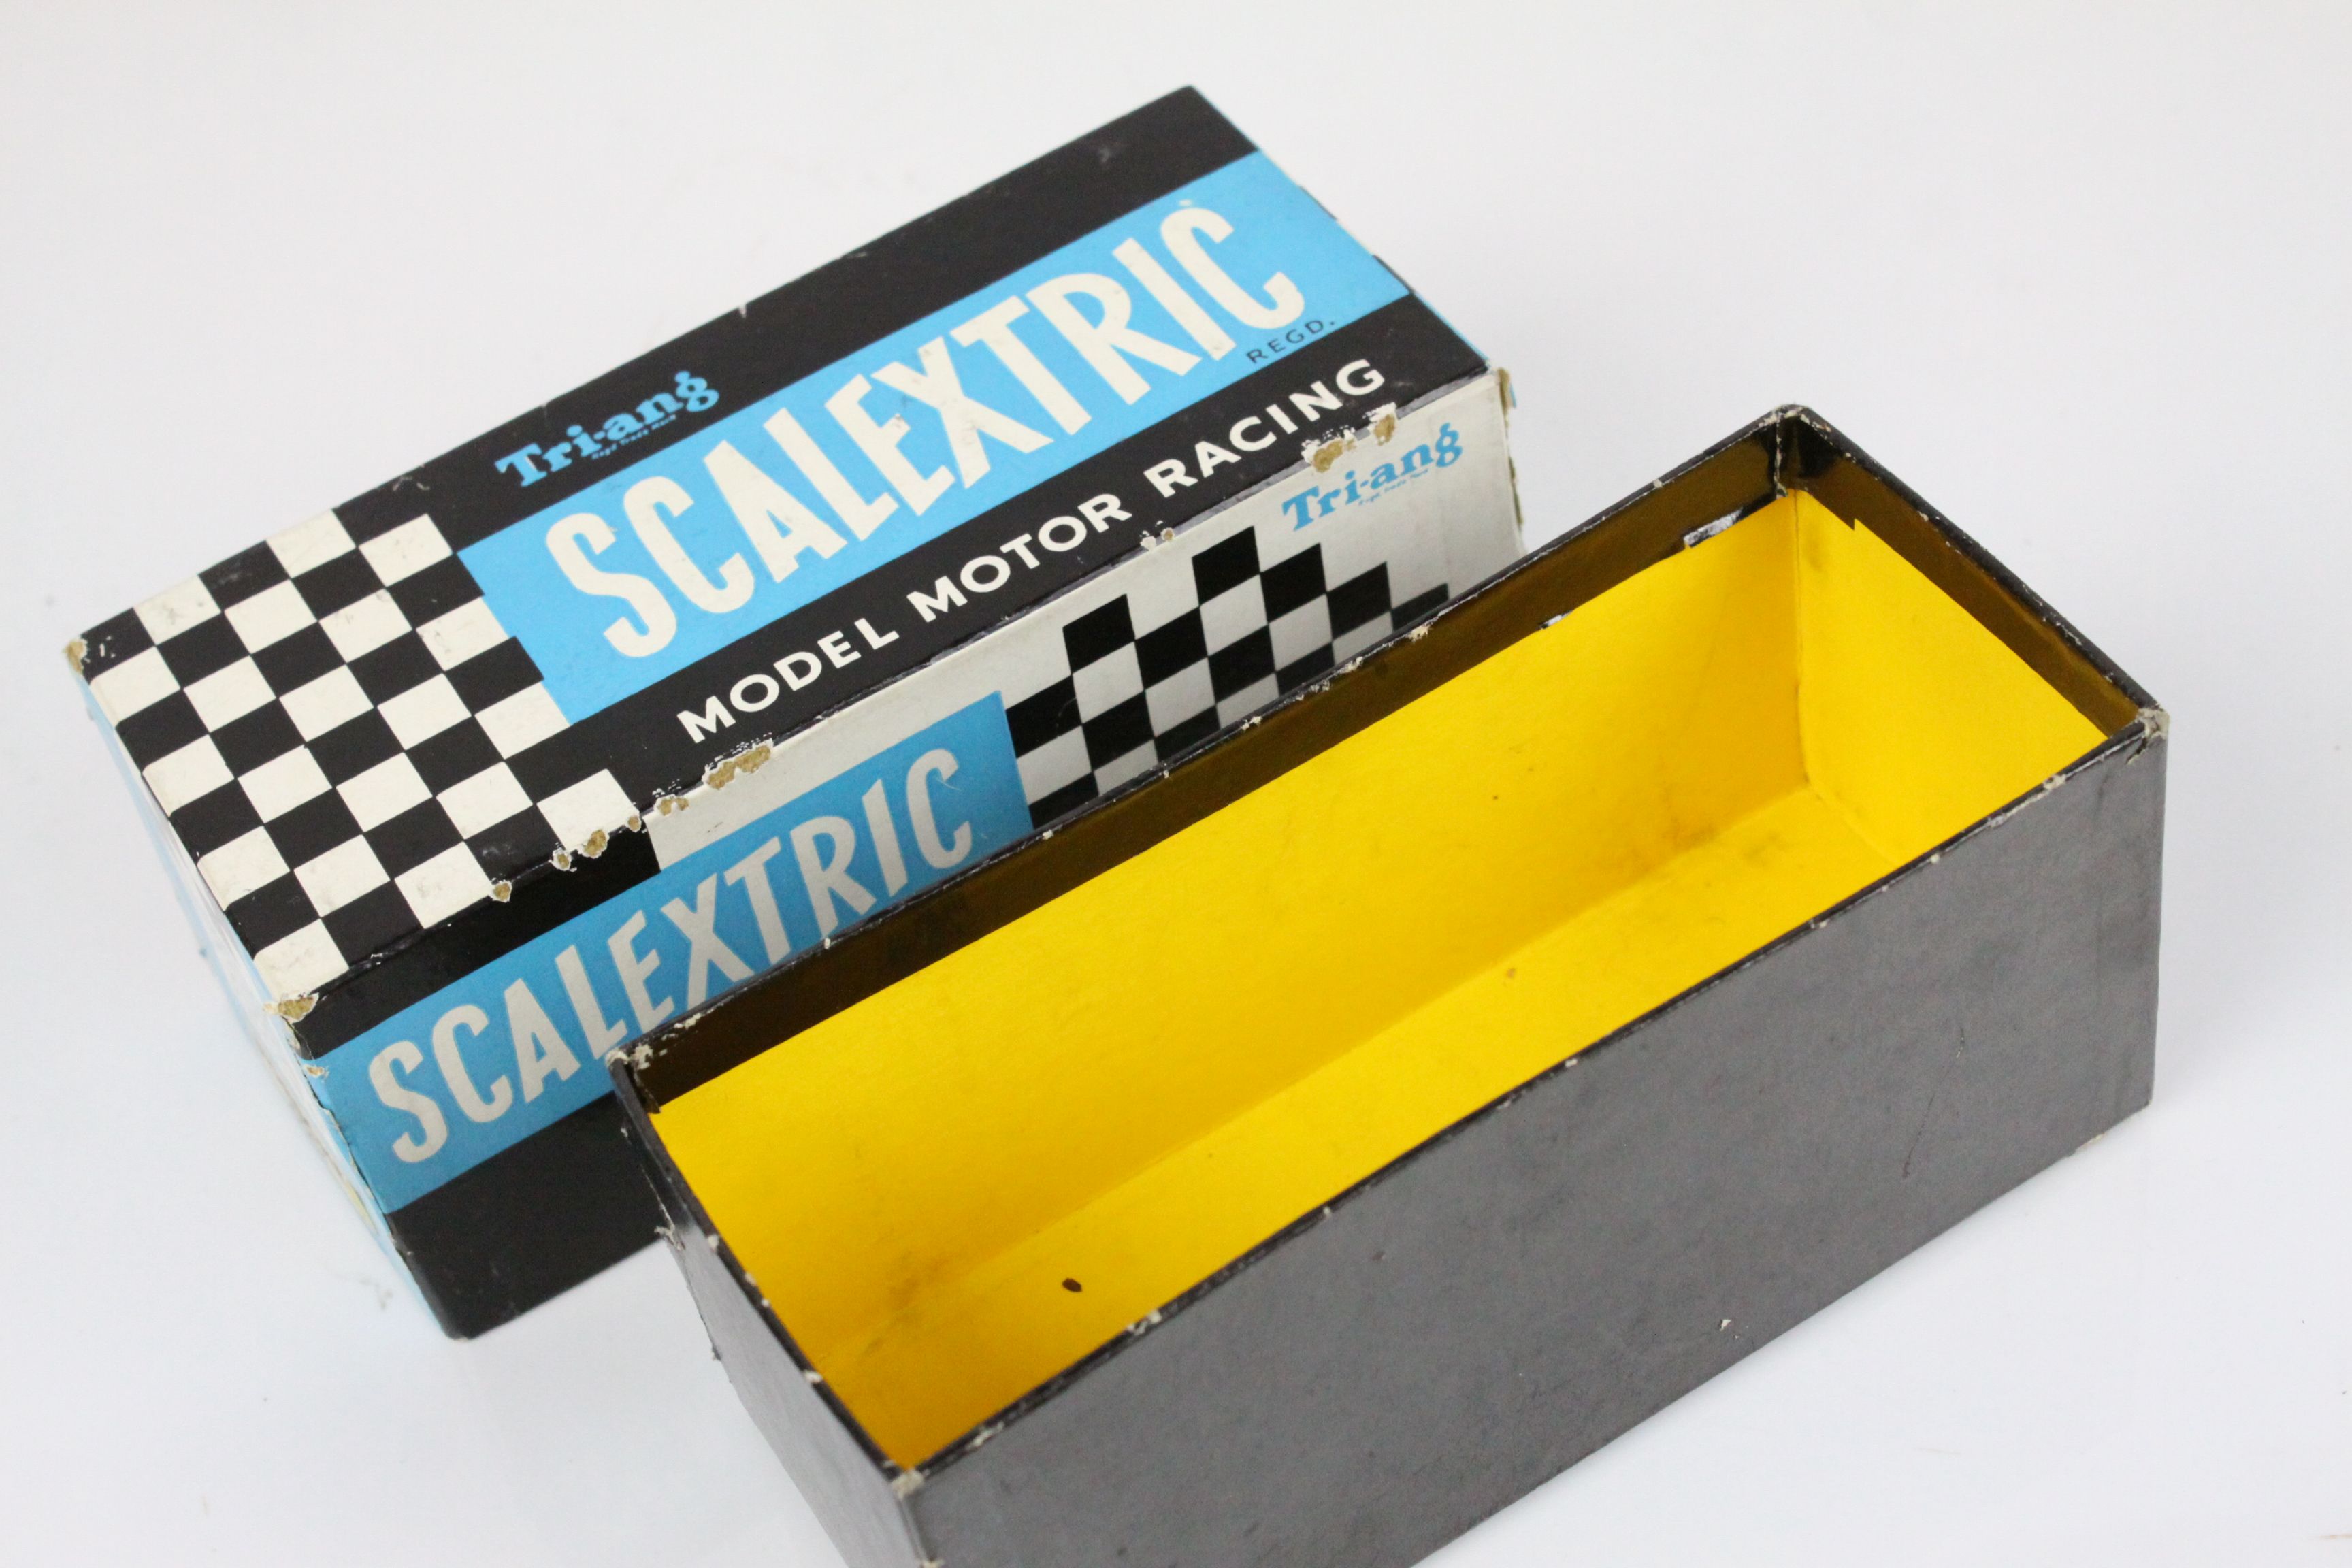 Boxed Triang Scalextric MM C61 Porsche slot car in yellow, driver with red helmet, race number 13, - Image 11 of 11